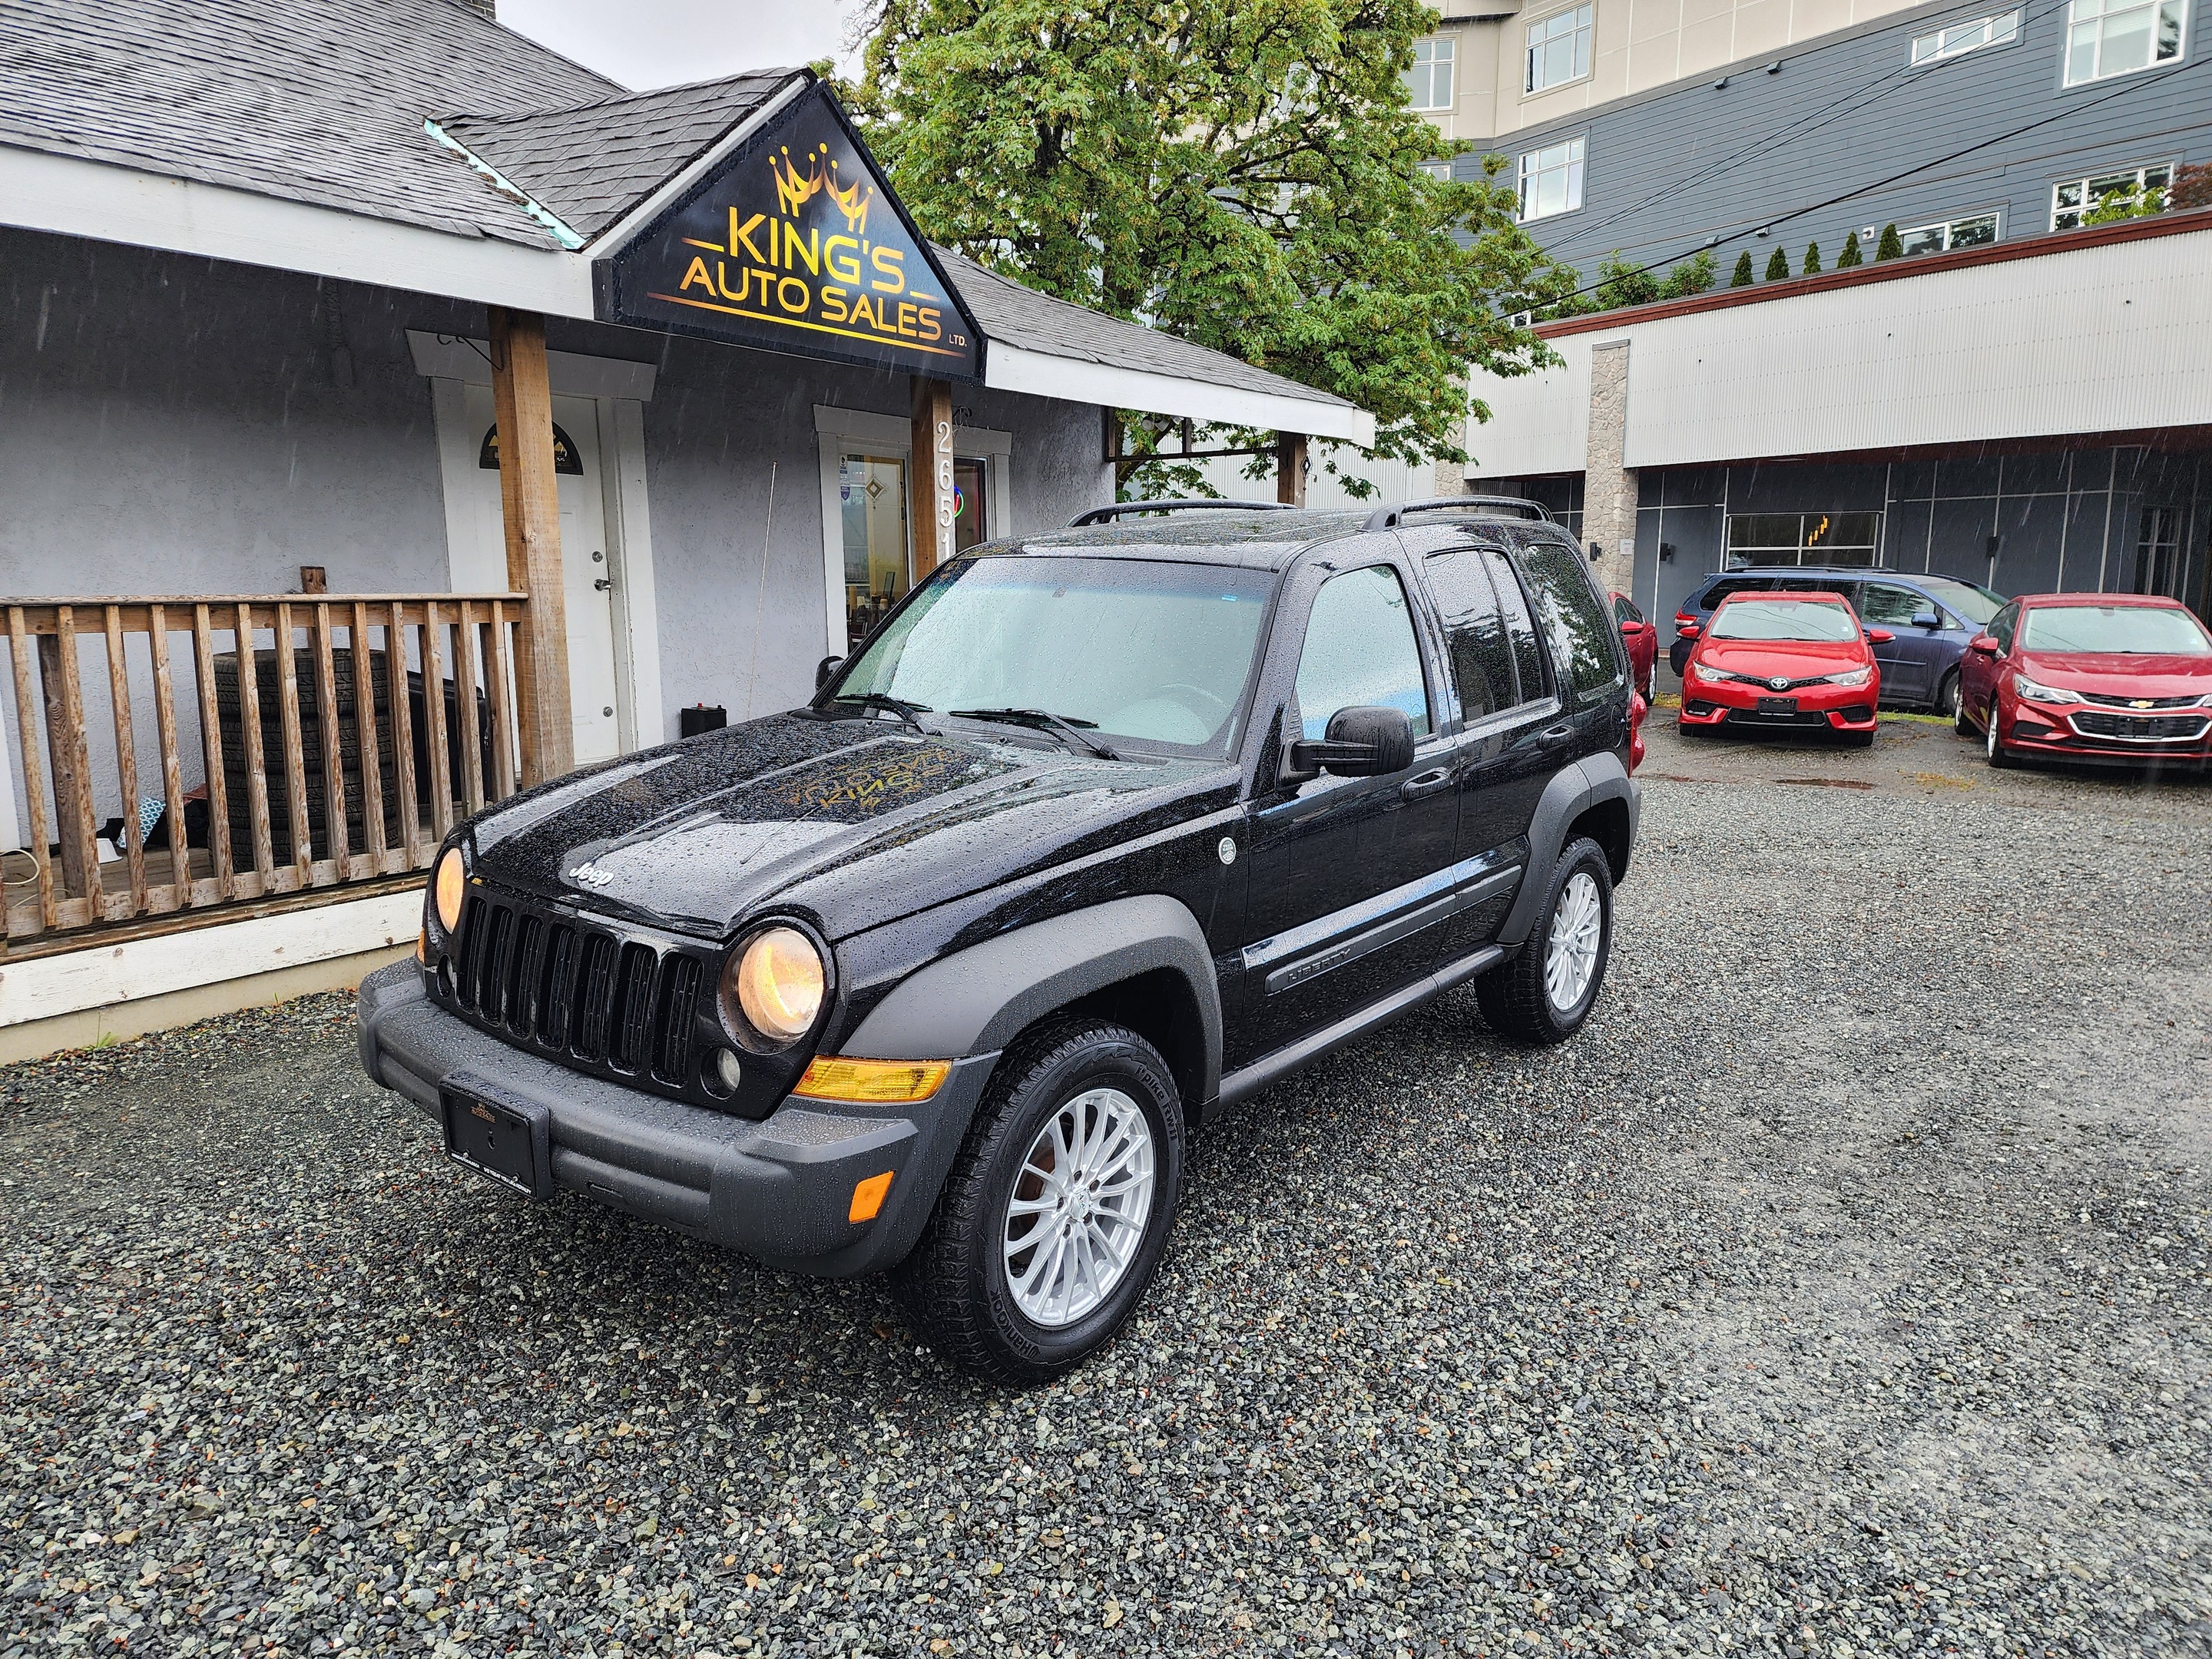 2007 Jeep Liberty 4WD 4dr Sport, Cruise, Sunroof, Power group, A/C